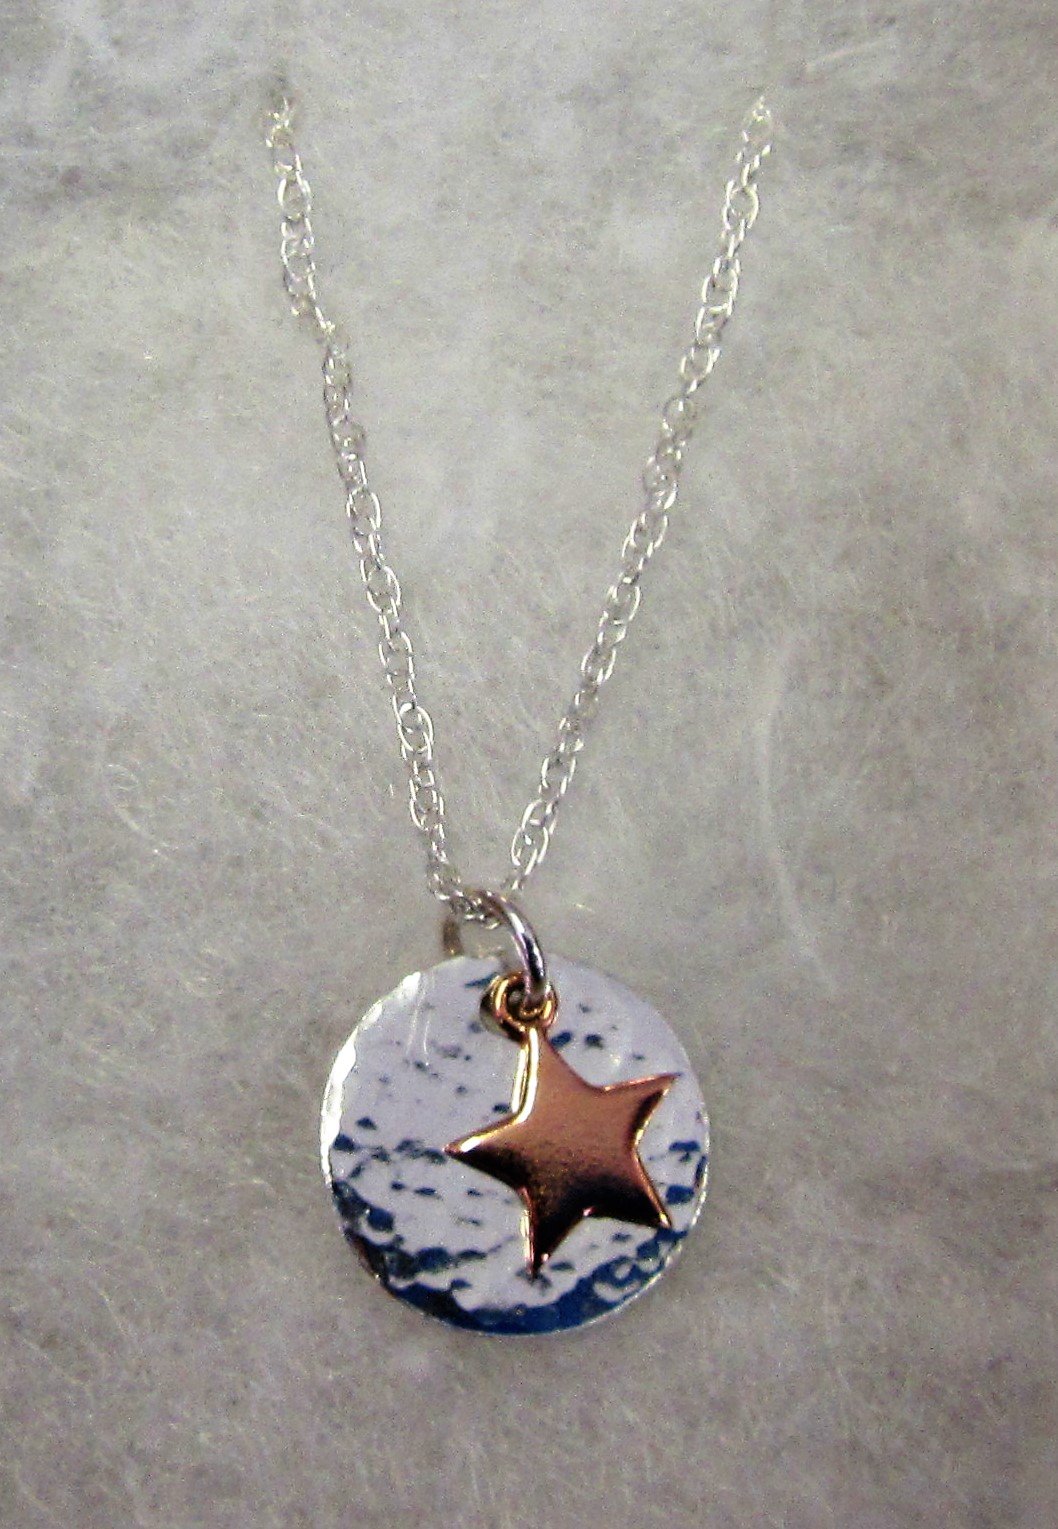 Handcrafted 925 sterling silver hammered disk with rose gold hanging star necklace